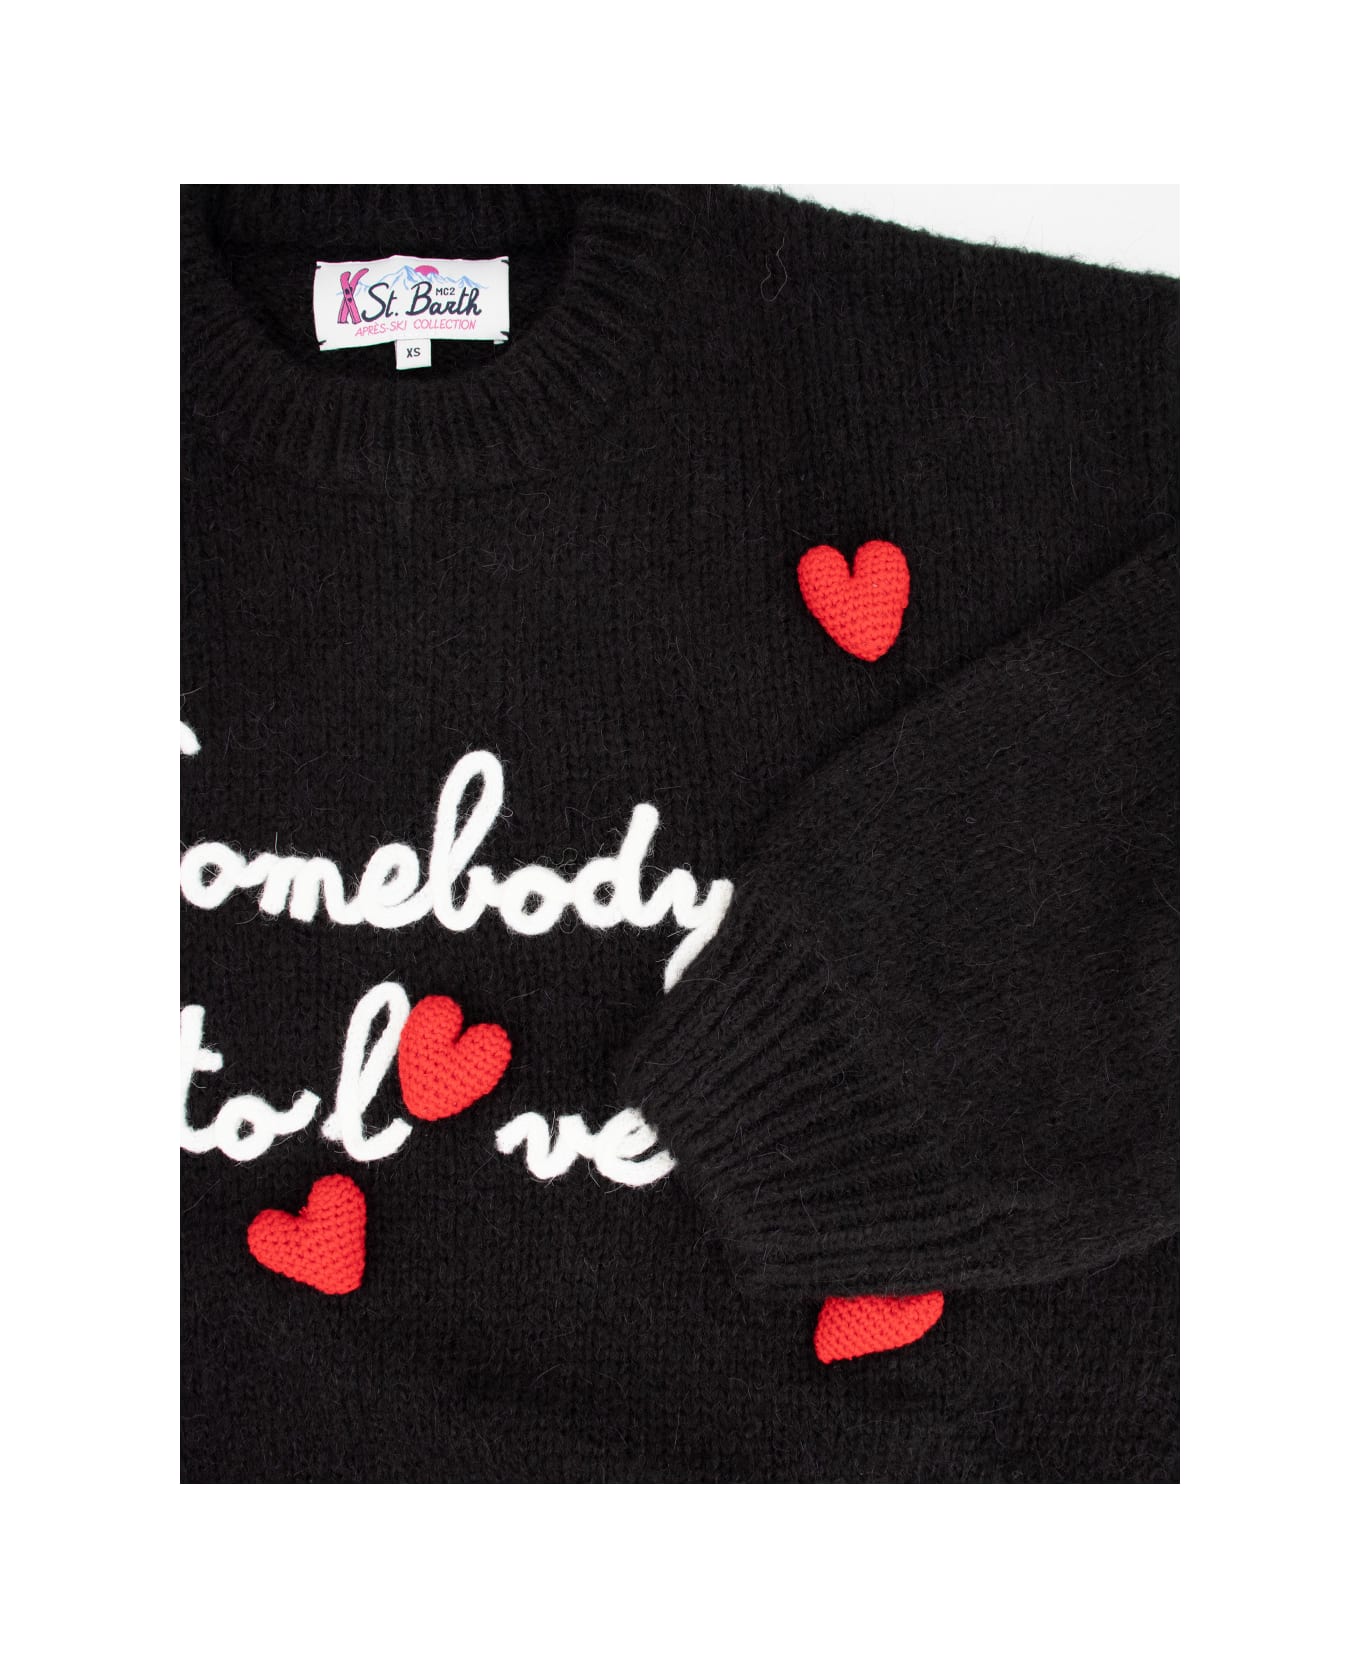 MC2 Saint Barth Pullover - SOMEBODY 00 HEART PATCH